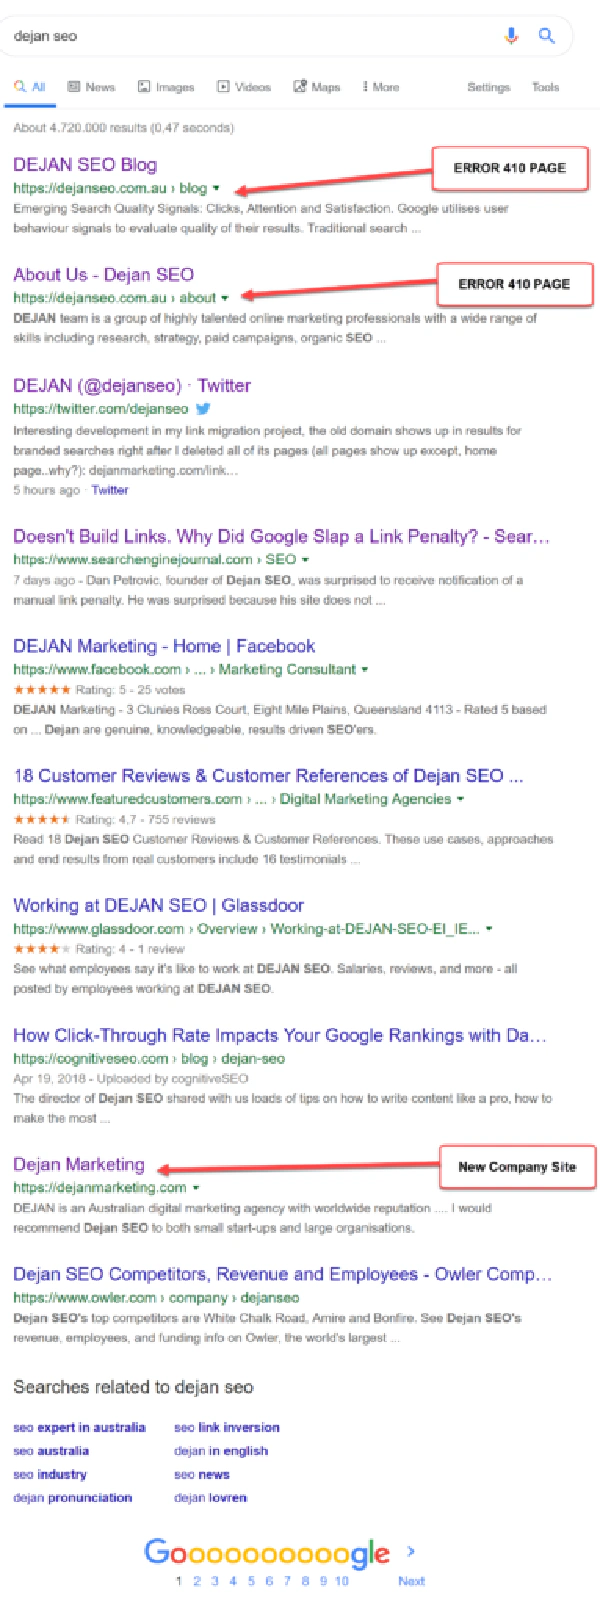 surfacing multiple pages with 410 is very undesirable for anyone - the user searching, the publisher and of course Google